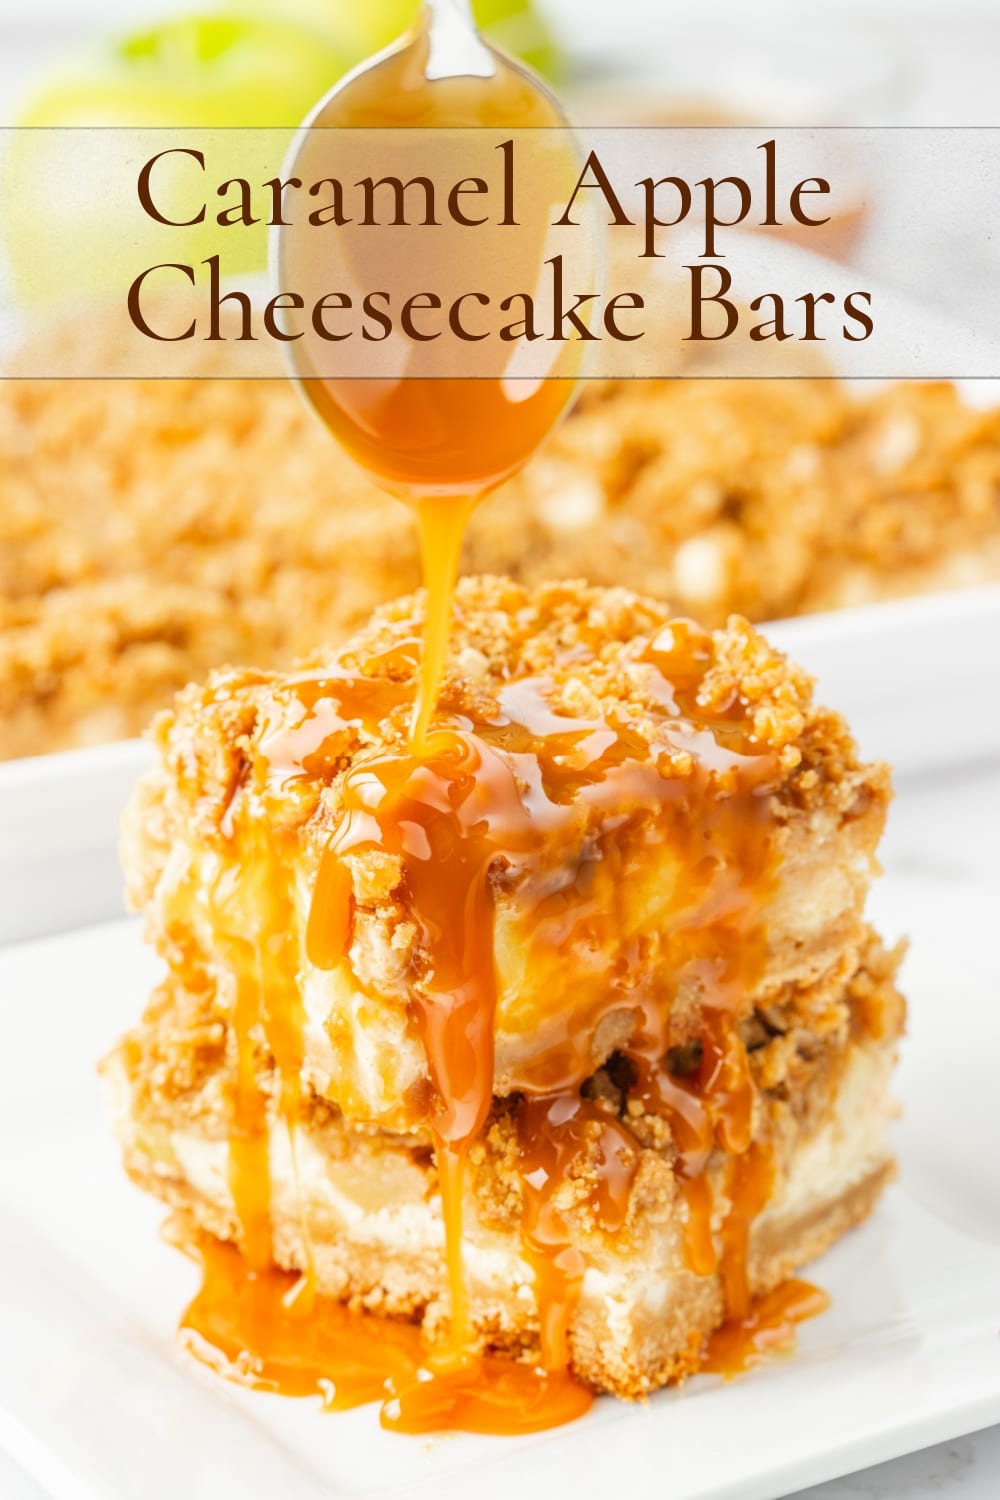 Starting with a brown sugar shortbread crust, these Caramel Apple Cheesecake Bars cradle an easy to make, velvety cheesecake layer. On top, a crunchy layer of apples is crowned with a buttery streusel topping and ribbons of caramel. It's the all-occasion fall dessert bar to make this season. This caramel apple dessert is also perfect for Thanksgiving dessert. via @cmpollak1